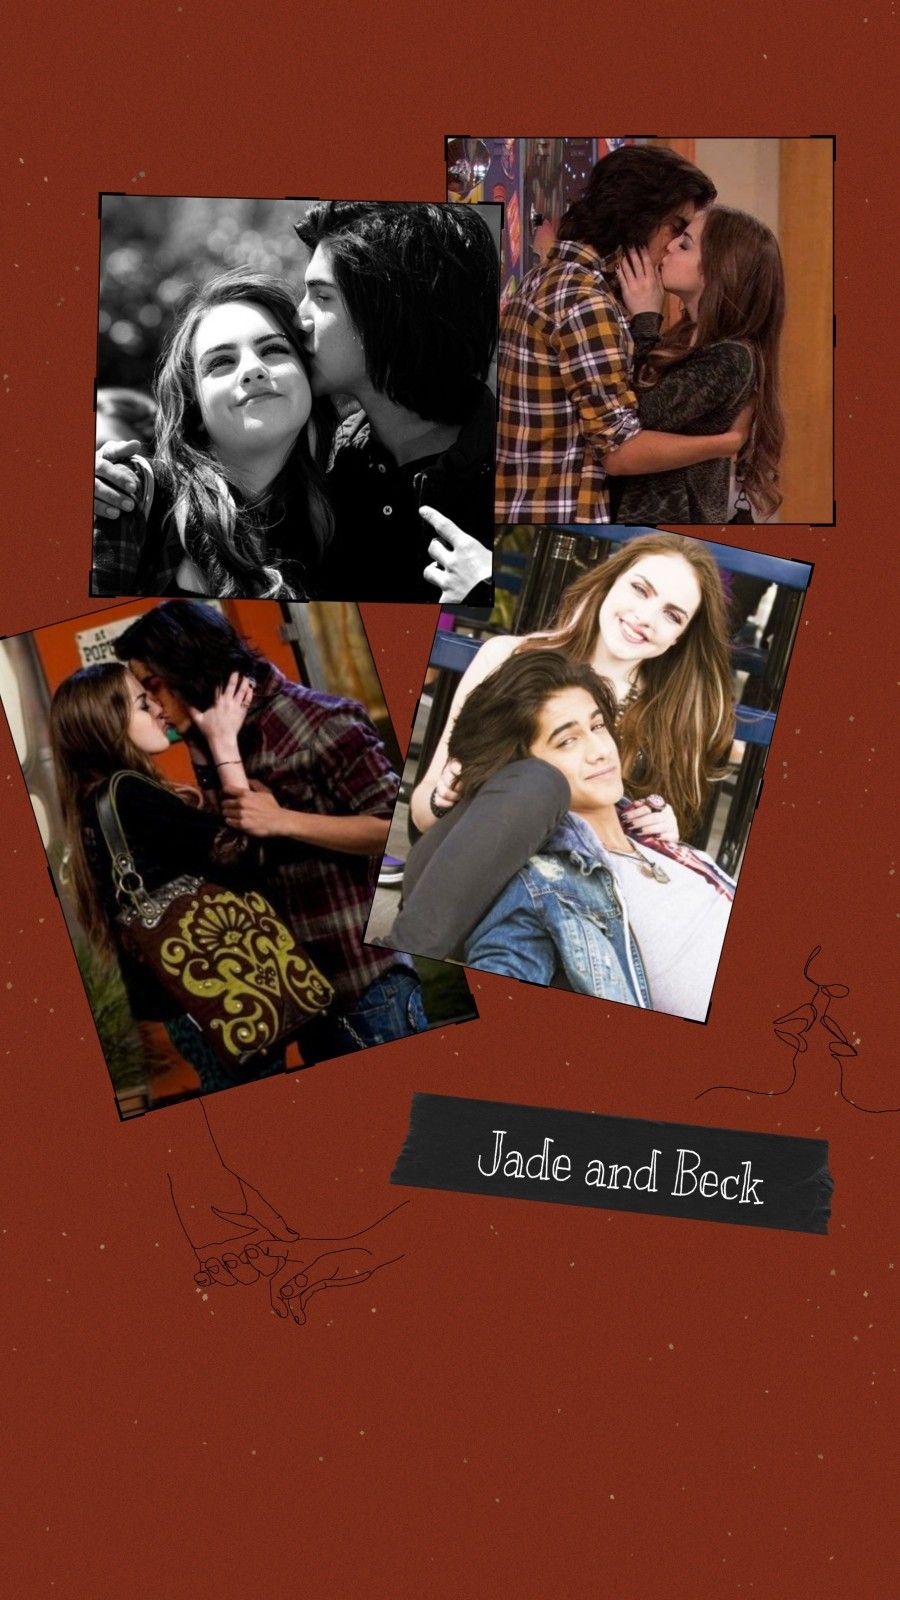 Jade e Beck. Jade and beck, Victorious jade and beck, Victorious cast